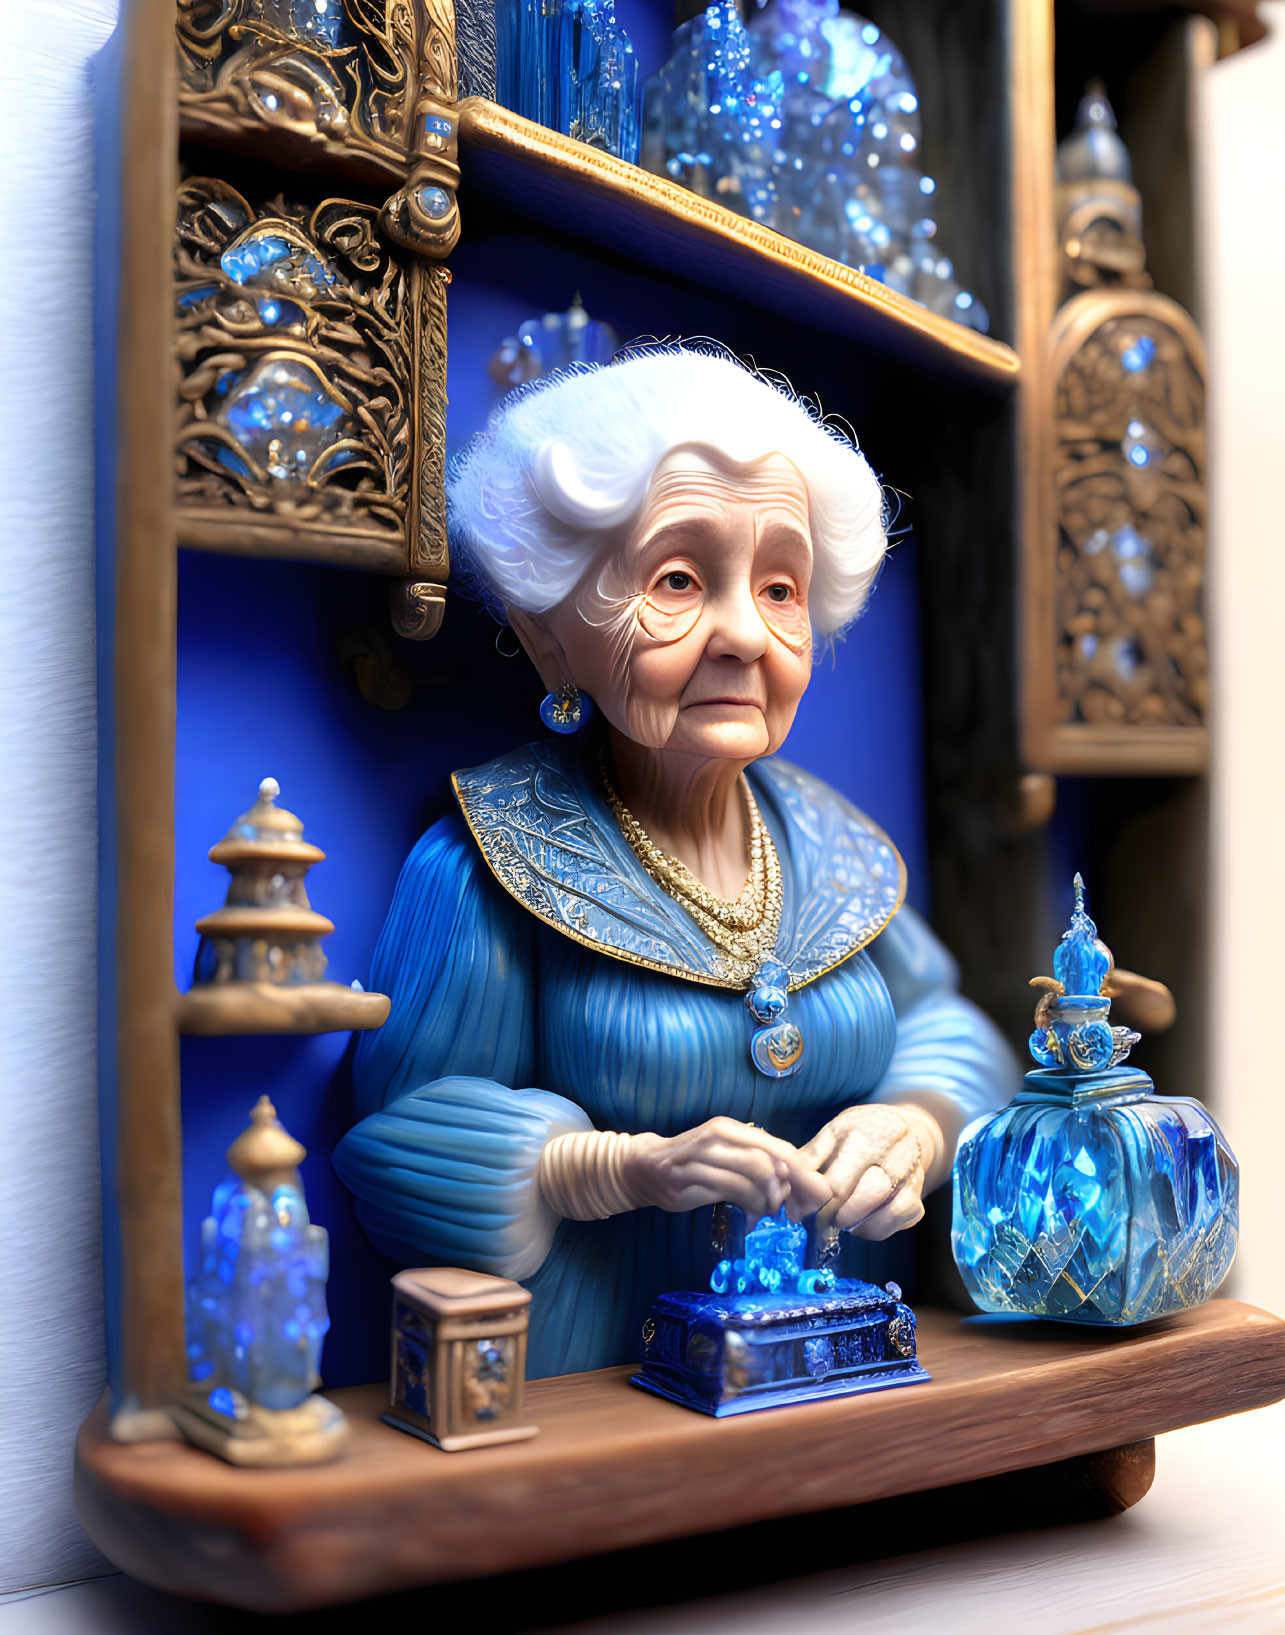 Elderly animated lady with white hair in blue dress at glass-adorned wooden shelf